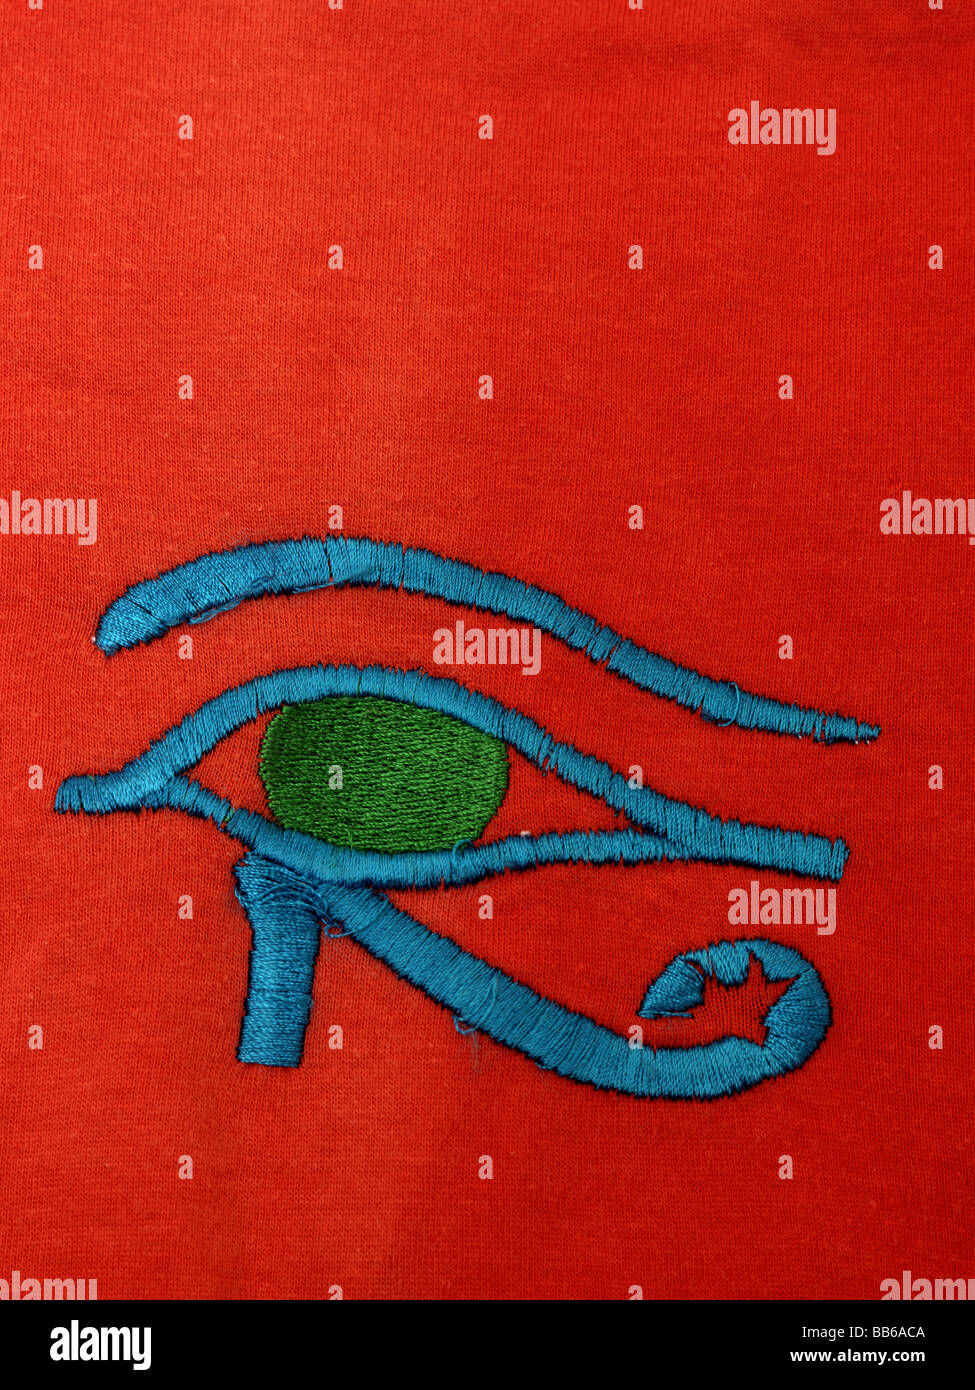 Embroidered Eye of Horus (Wedjat Eye) Ancient Egyptian Religious Symbol Representing Well-being, Healing and Protection Stock Photo